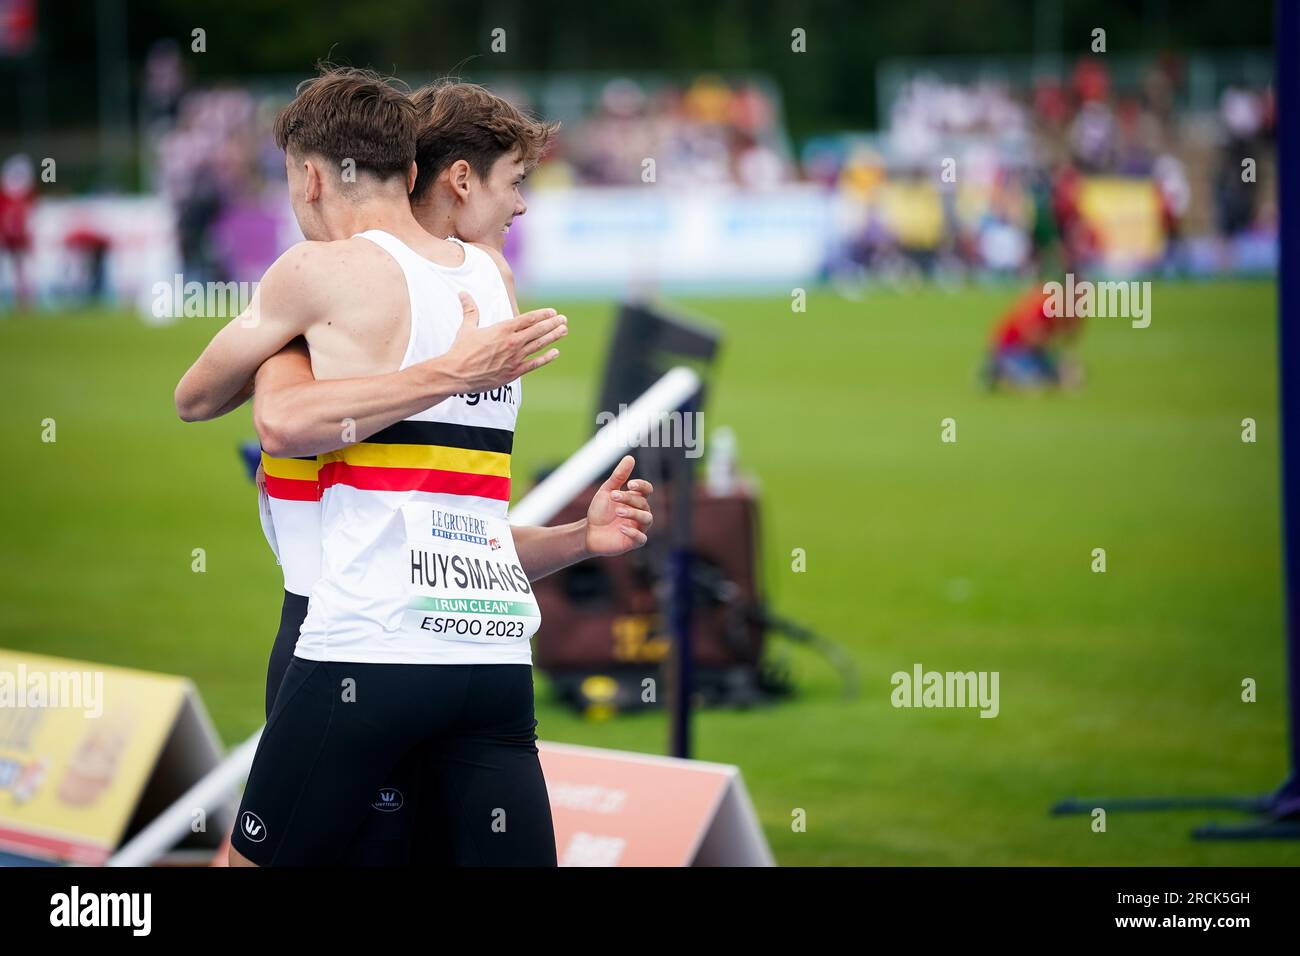 Espoo, Finland. 15th July, 2023. The Belgian Falcons, the Belgian 4x100m relay team, with Belgian Rendel Vermeulen and Belgian Timber Huysmans celebrate after their race at the third day of the European Athletics U23 Championships, Saturday 15 July 2023 in Espoo, Finland. The European championships take place from 13 to 17 July. BELGA PHOTO COEN SCHILDERMAN Credit: Belga News Agency/Alamy Live News Stock Photo